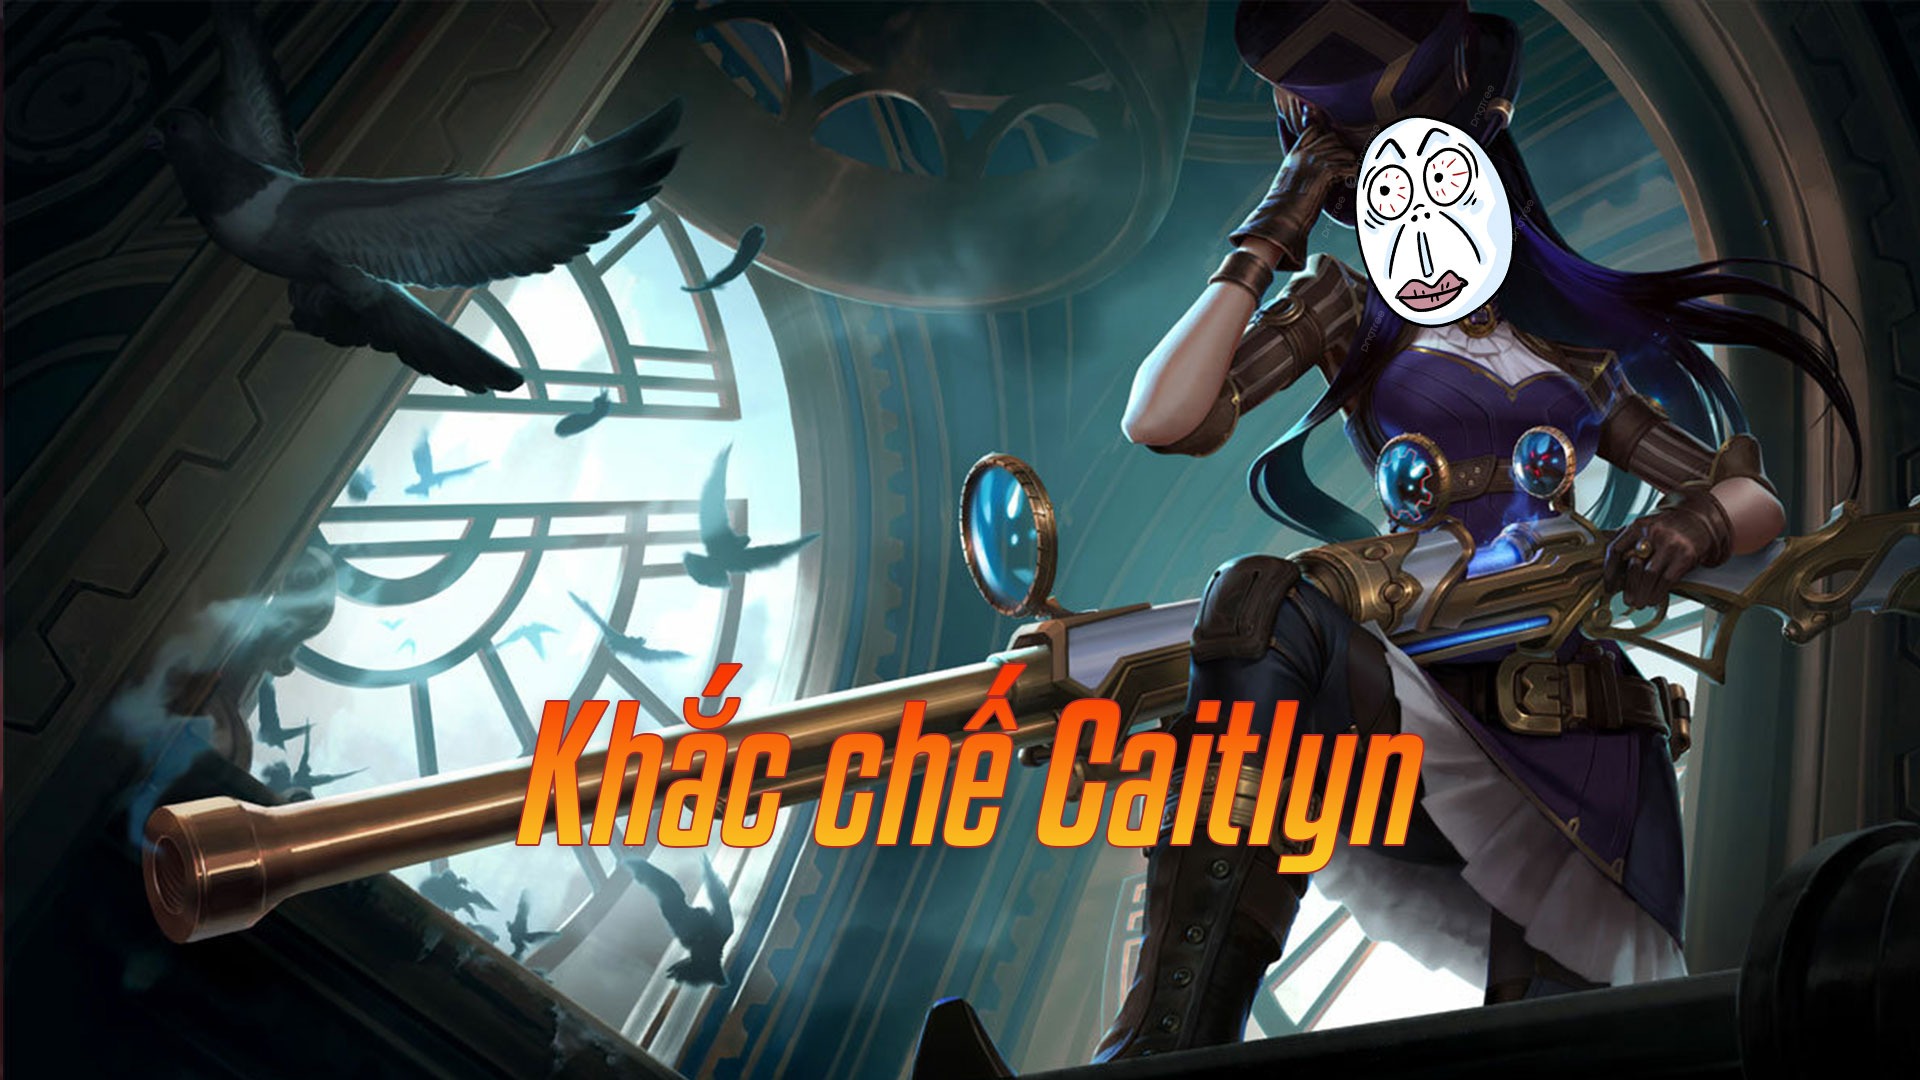 Khắc chế Caitlyn>